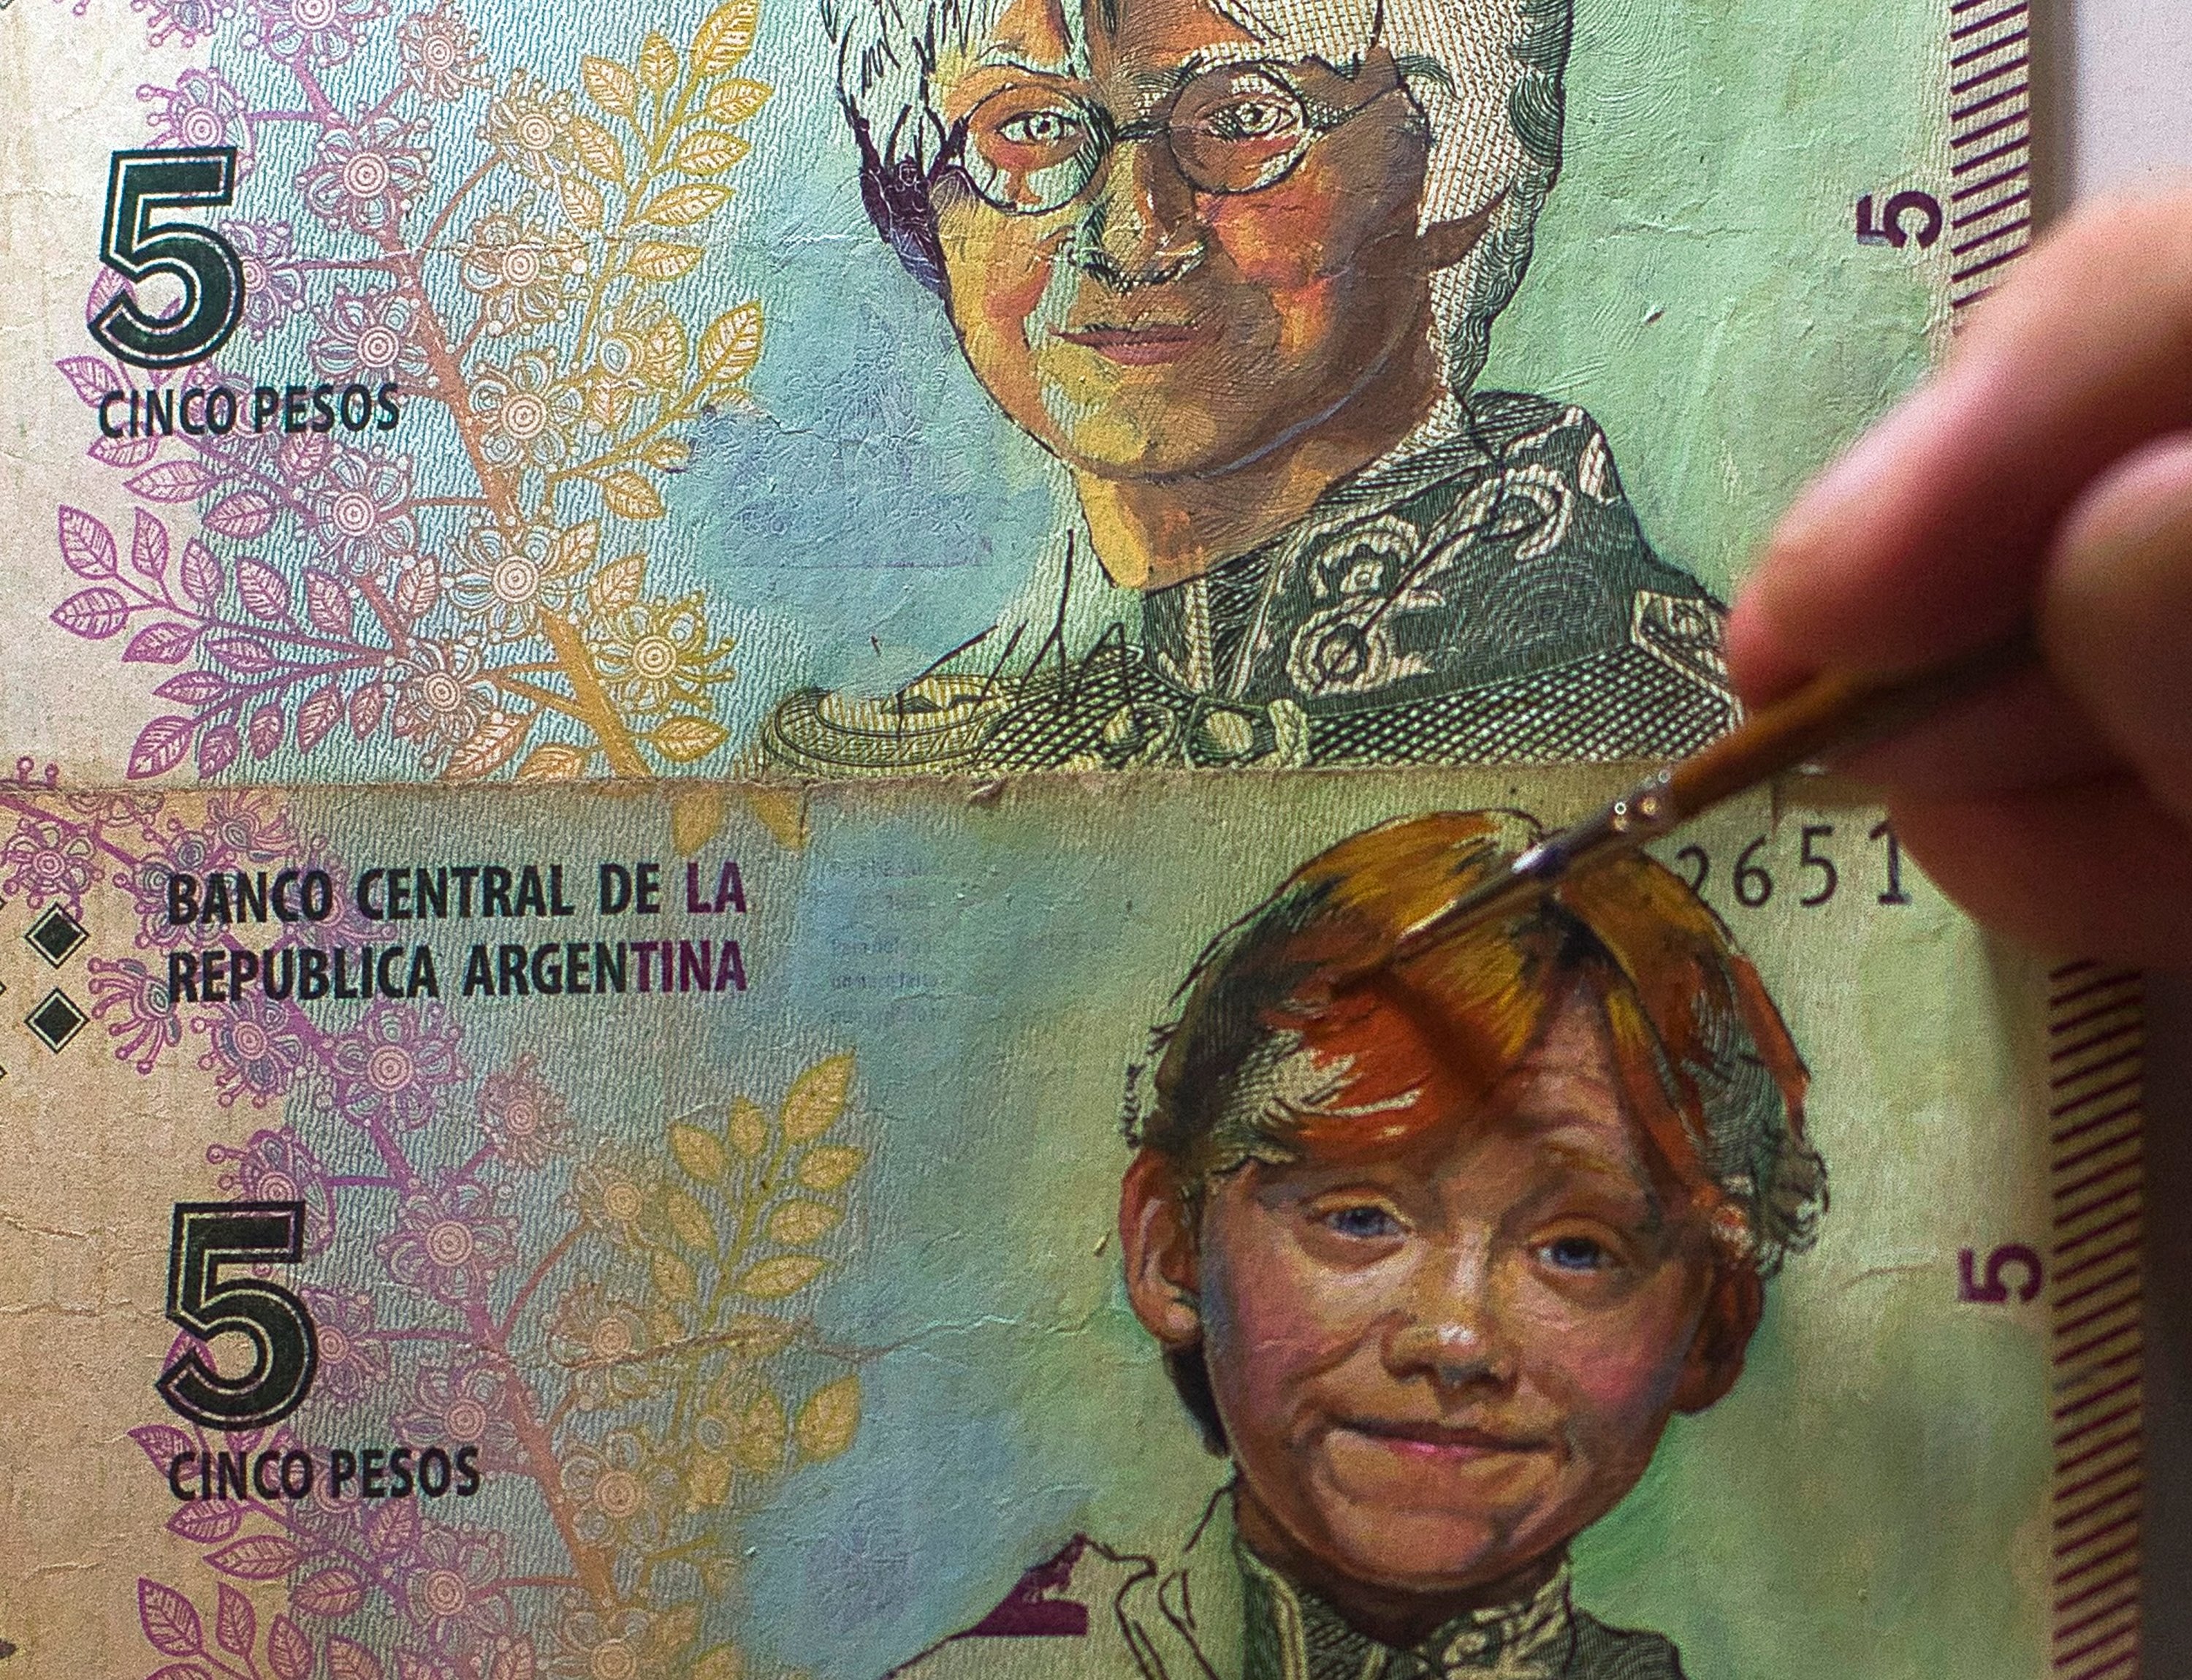 Artist Sergio Diaz intervenes Argentine pesos bills with portraits of characters from the movie 